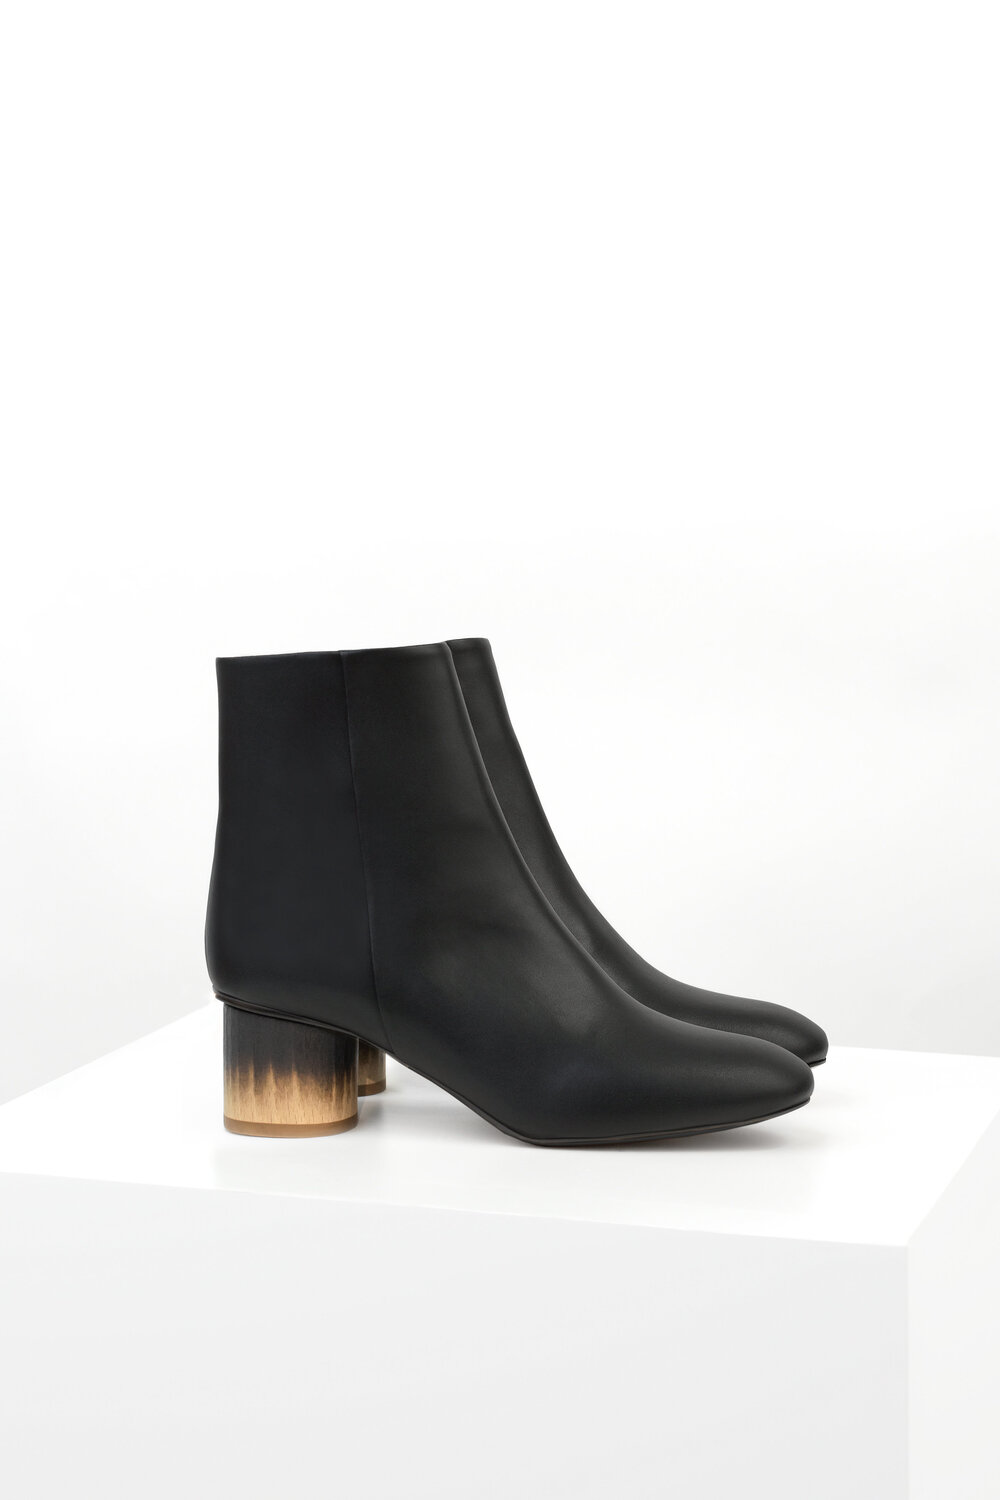 AW19 Low Ankle Boot Black Faux-Nappa Burned Heel copy.jpg